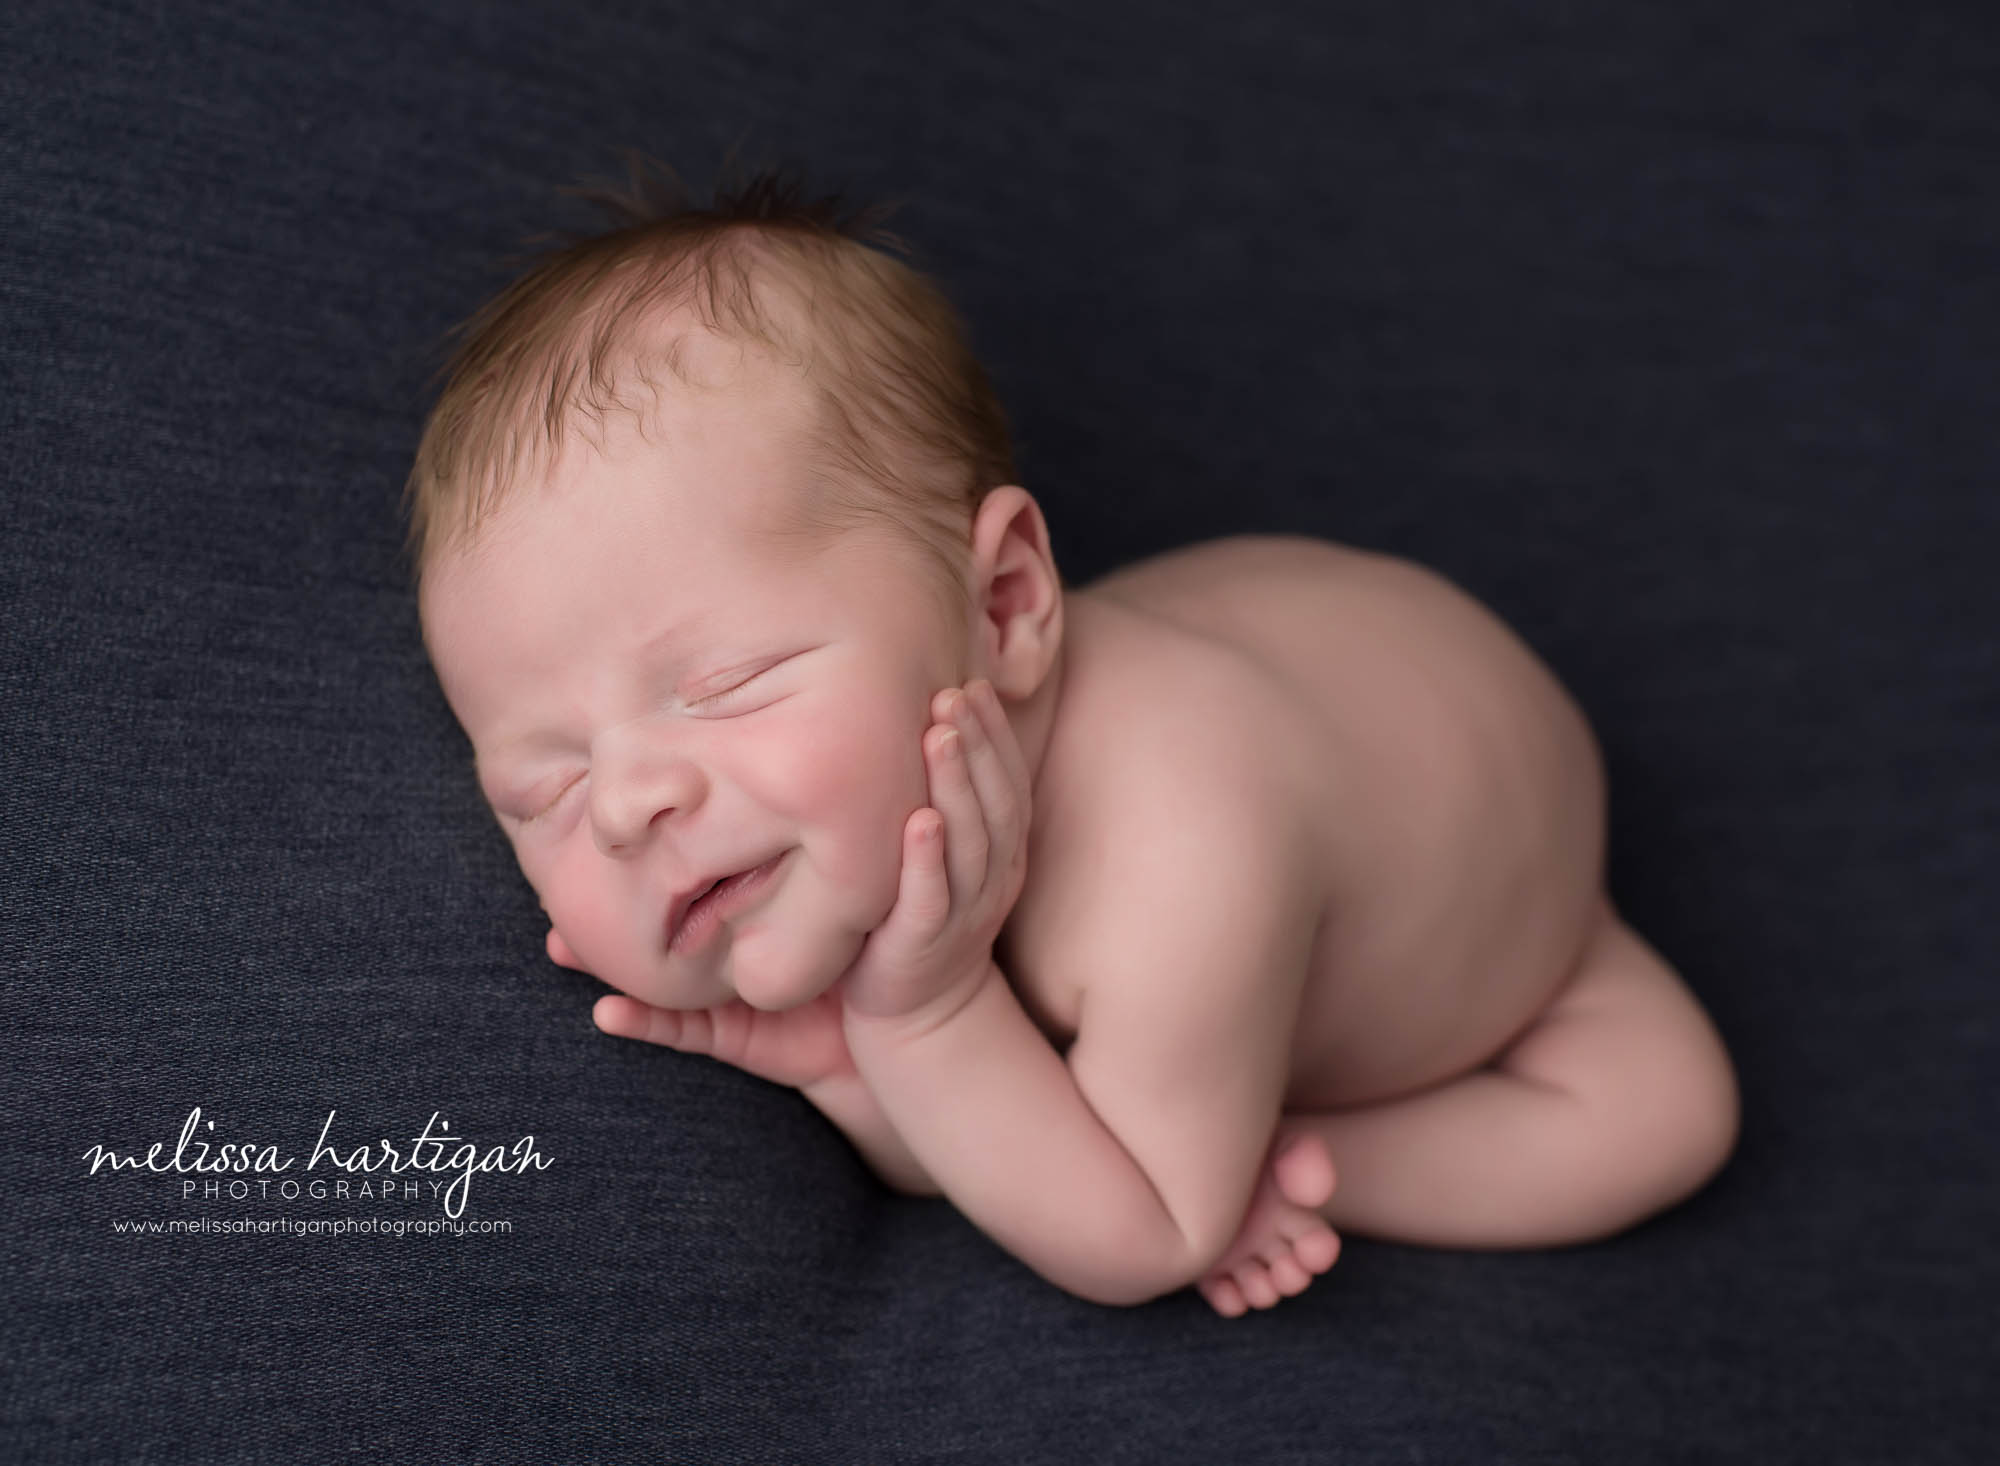 newborn baby boy pose don side with smile on face newborn photography east windsor